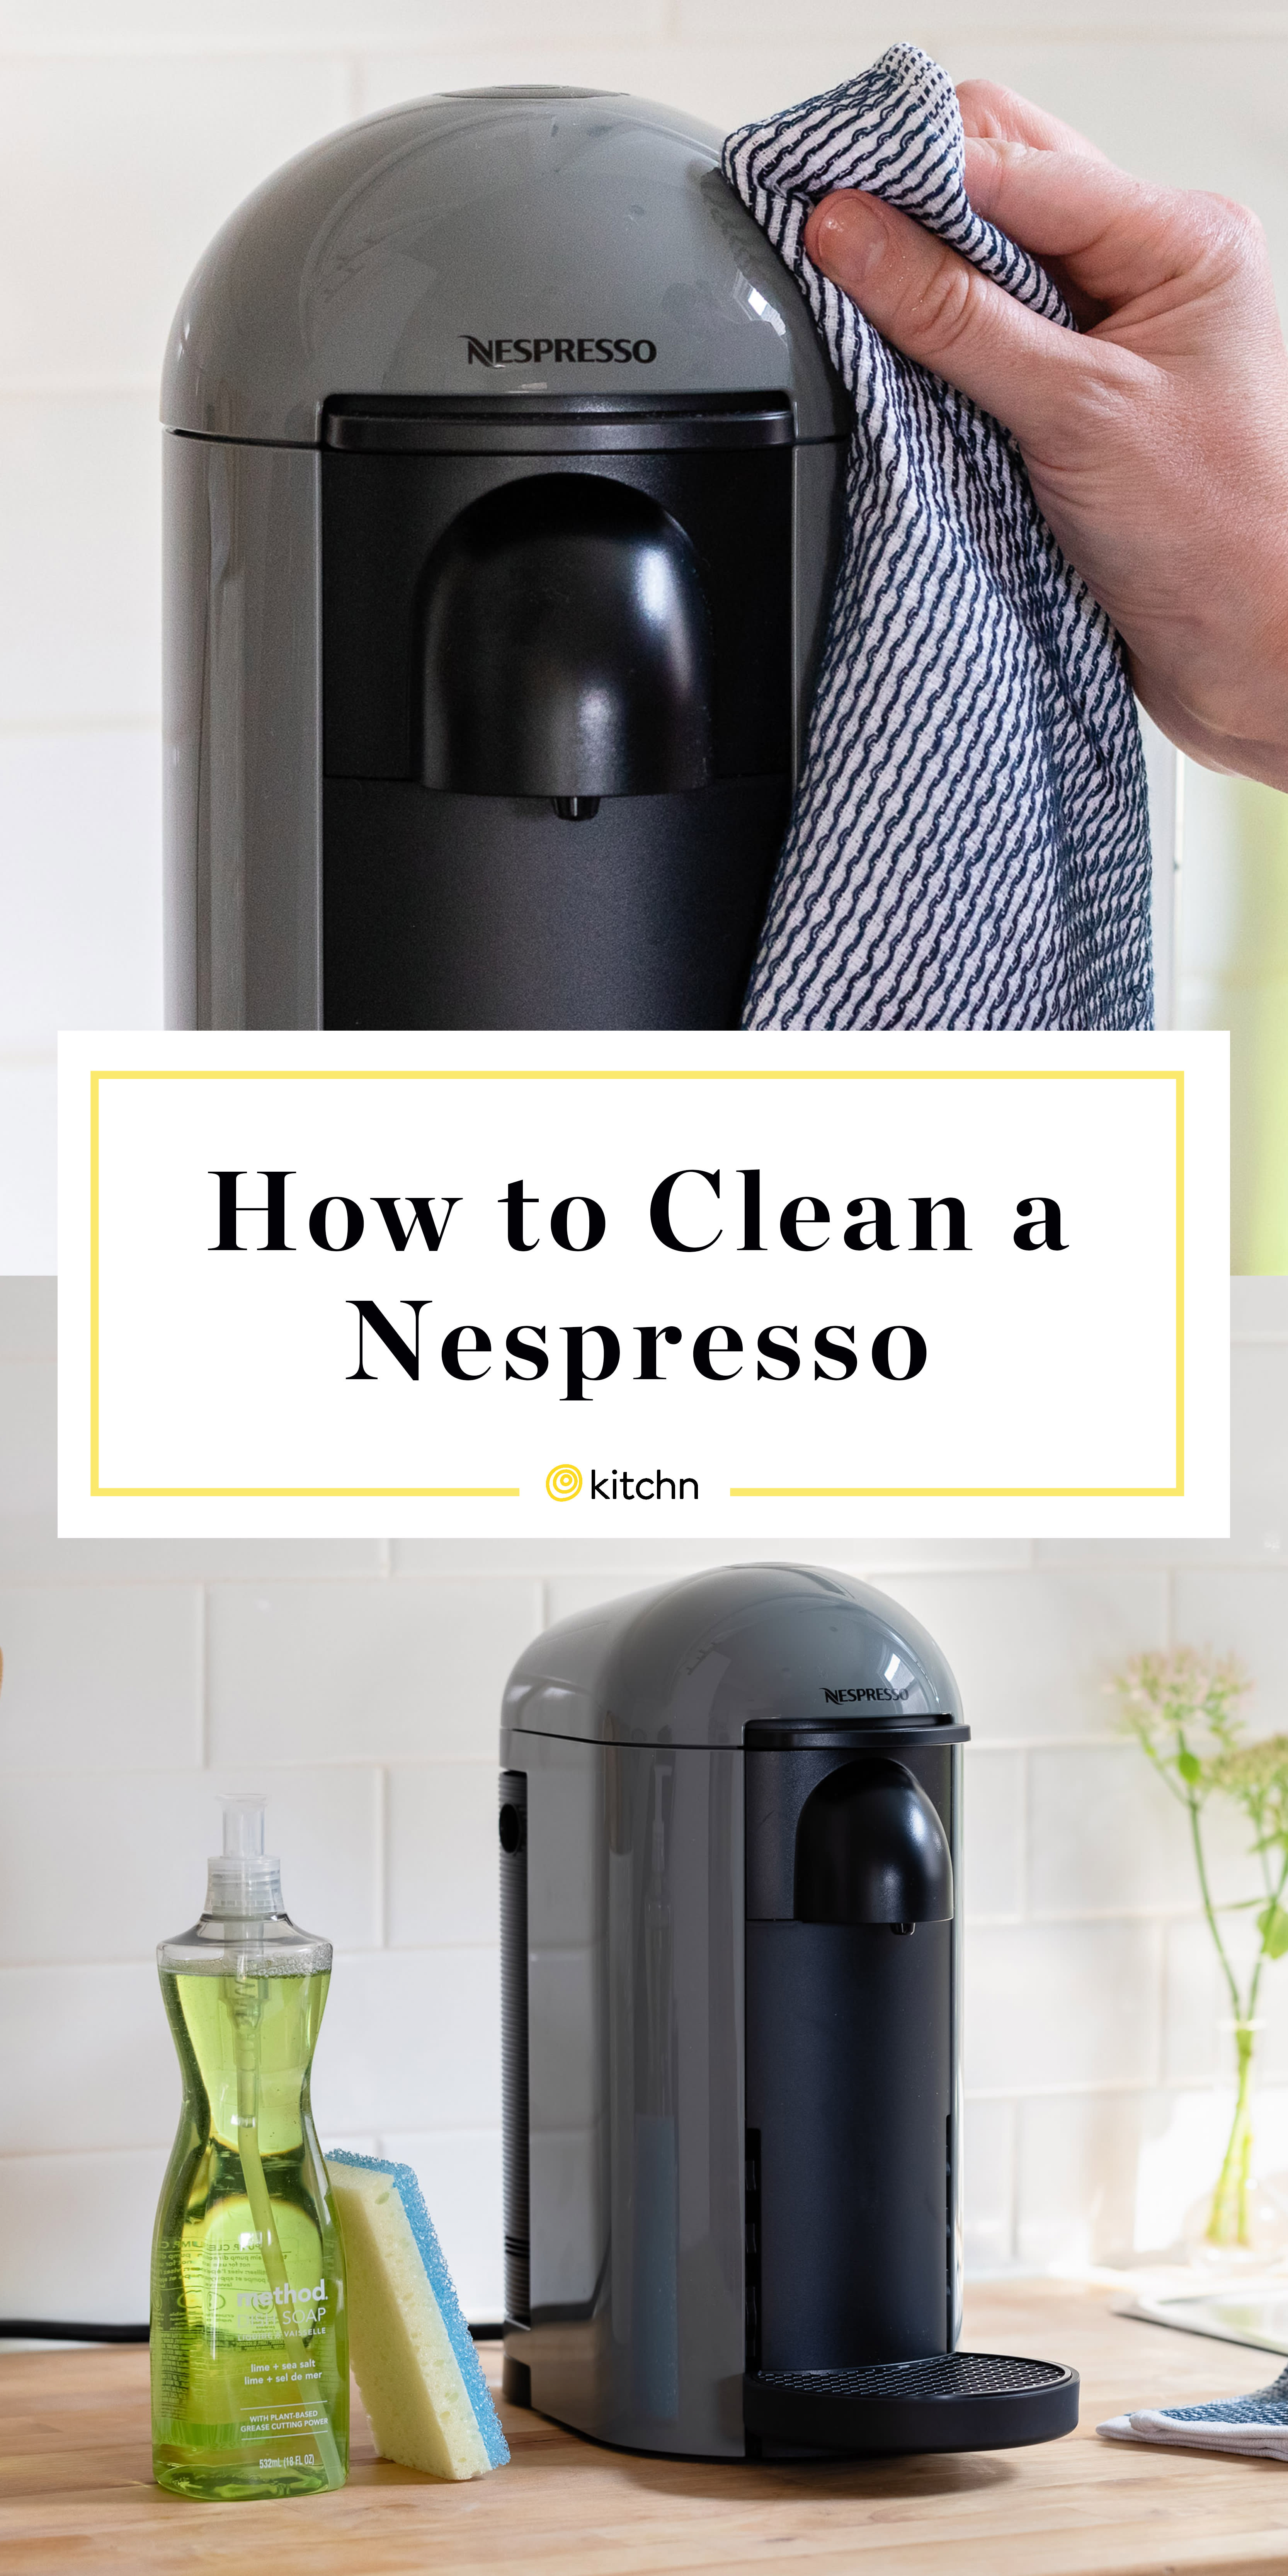 How to Get Nespresso Out of Cleaning Mode? 